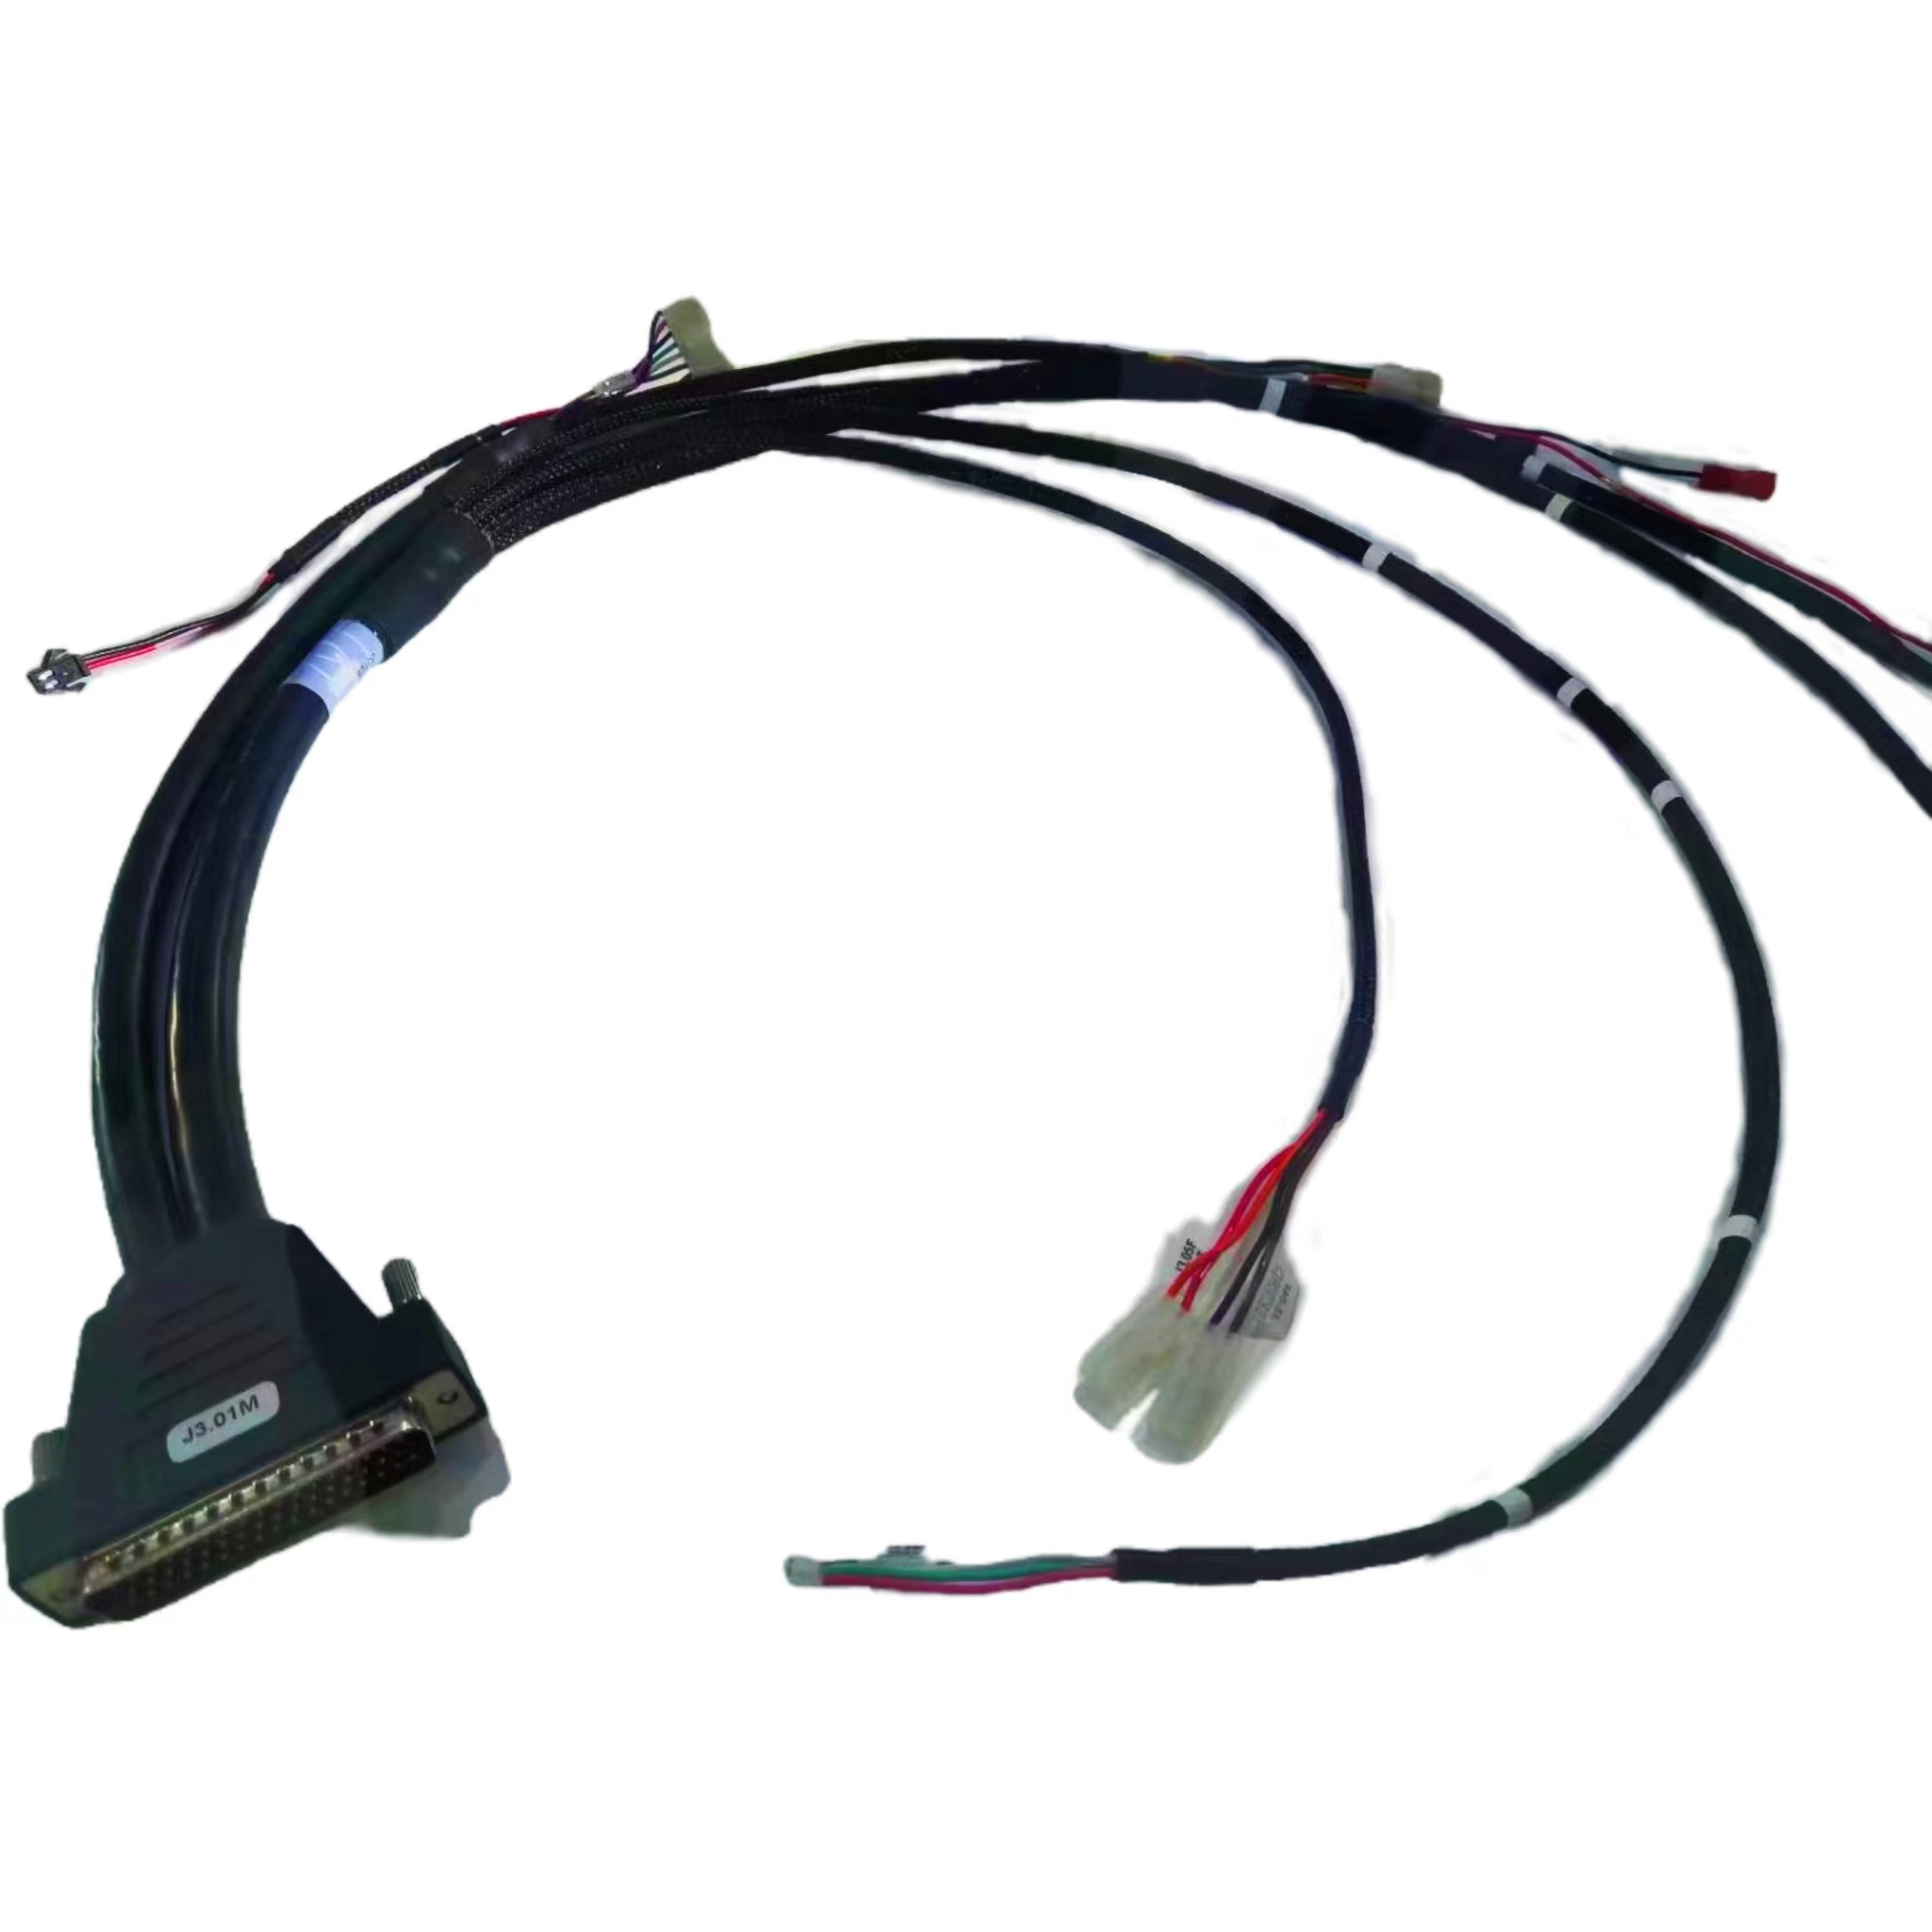 50PIN medical wire harness